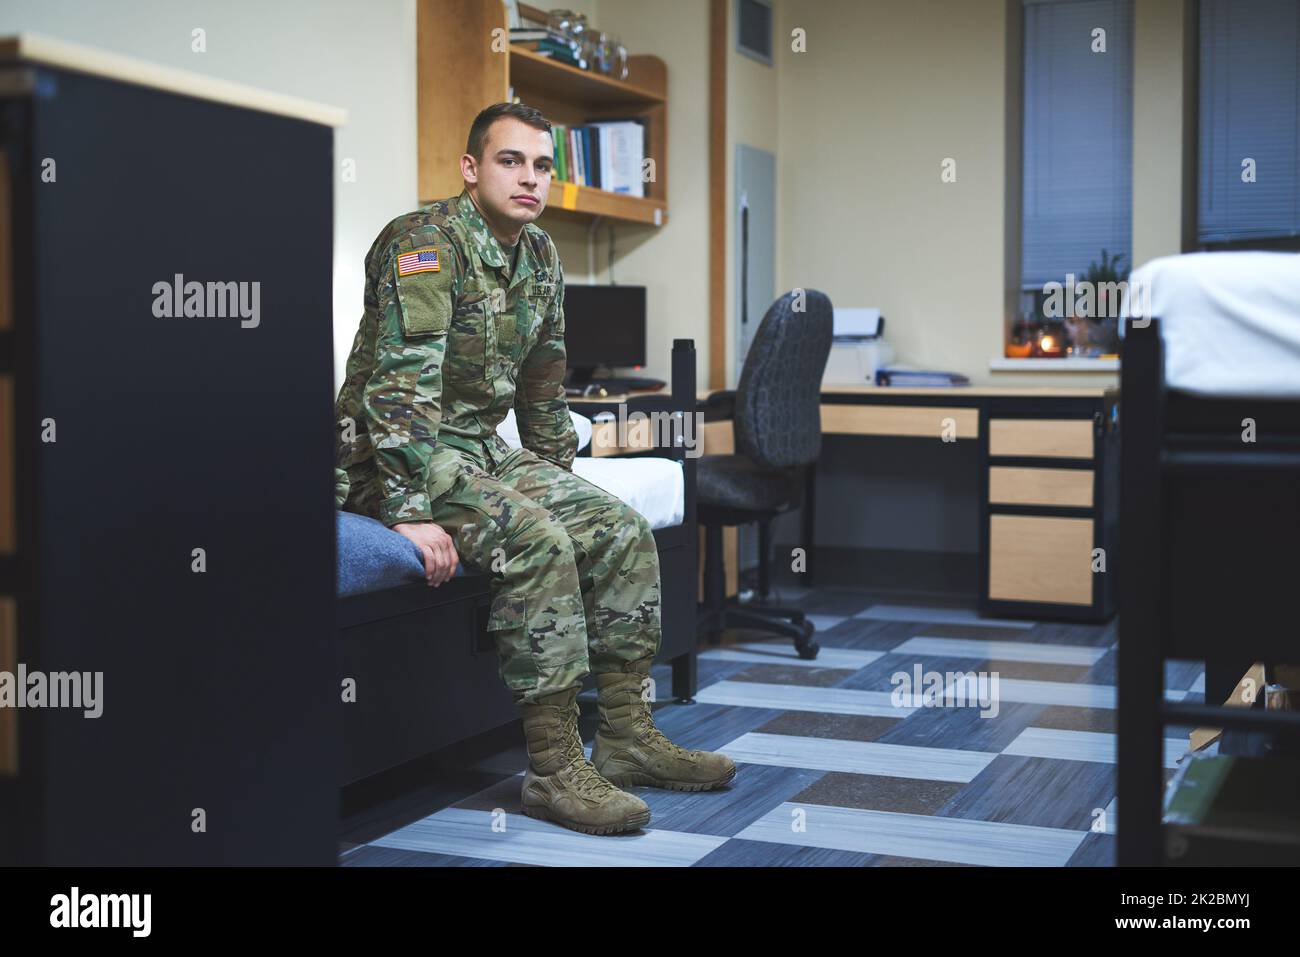 Some call it a dorm, I call it home. Shot of a young soldier sitting on his bed in the dorms of a military academy. Stock Photo